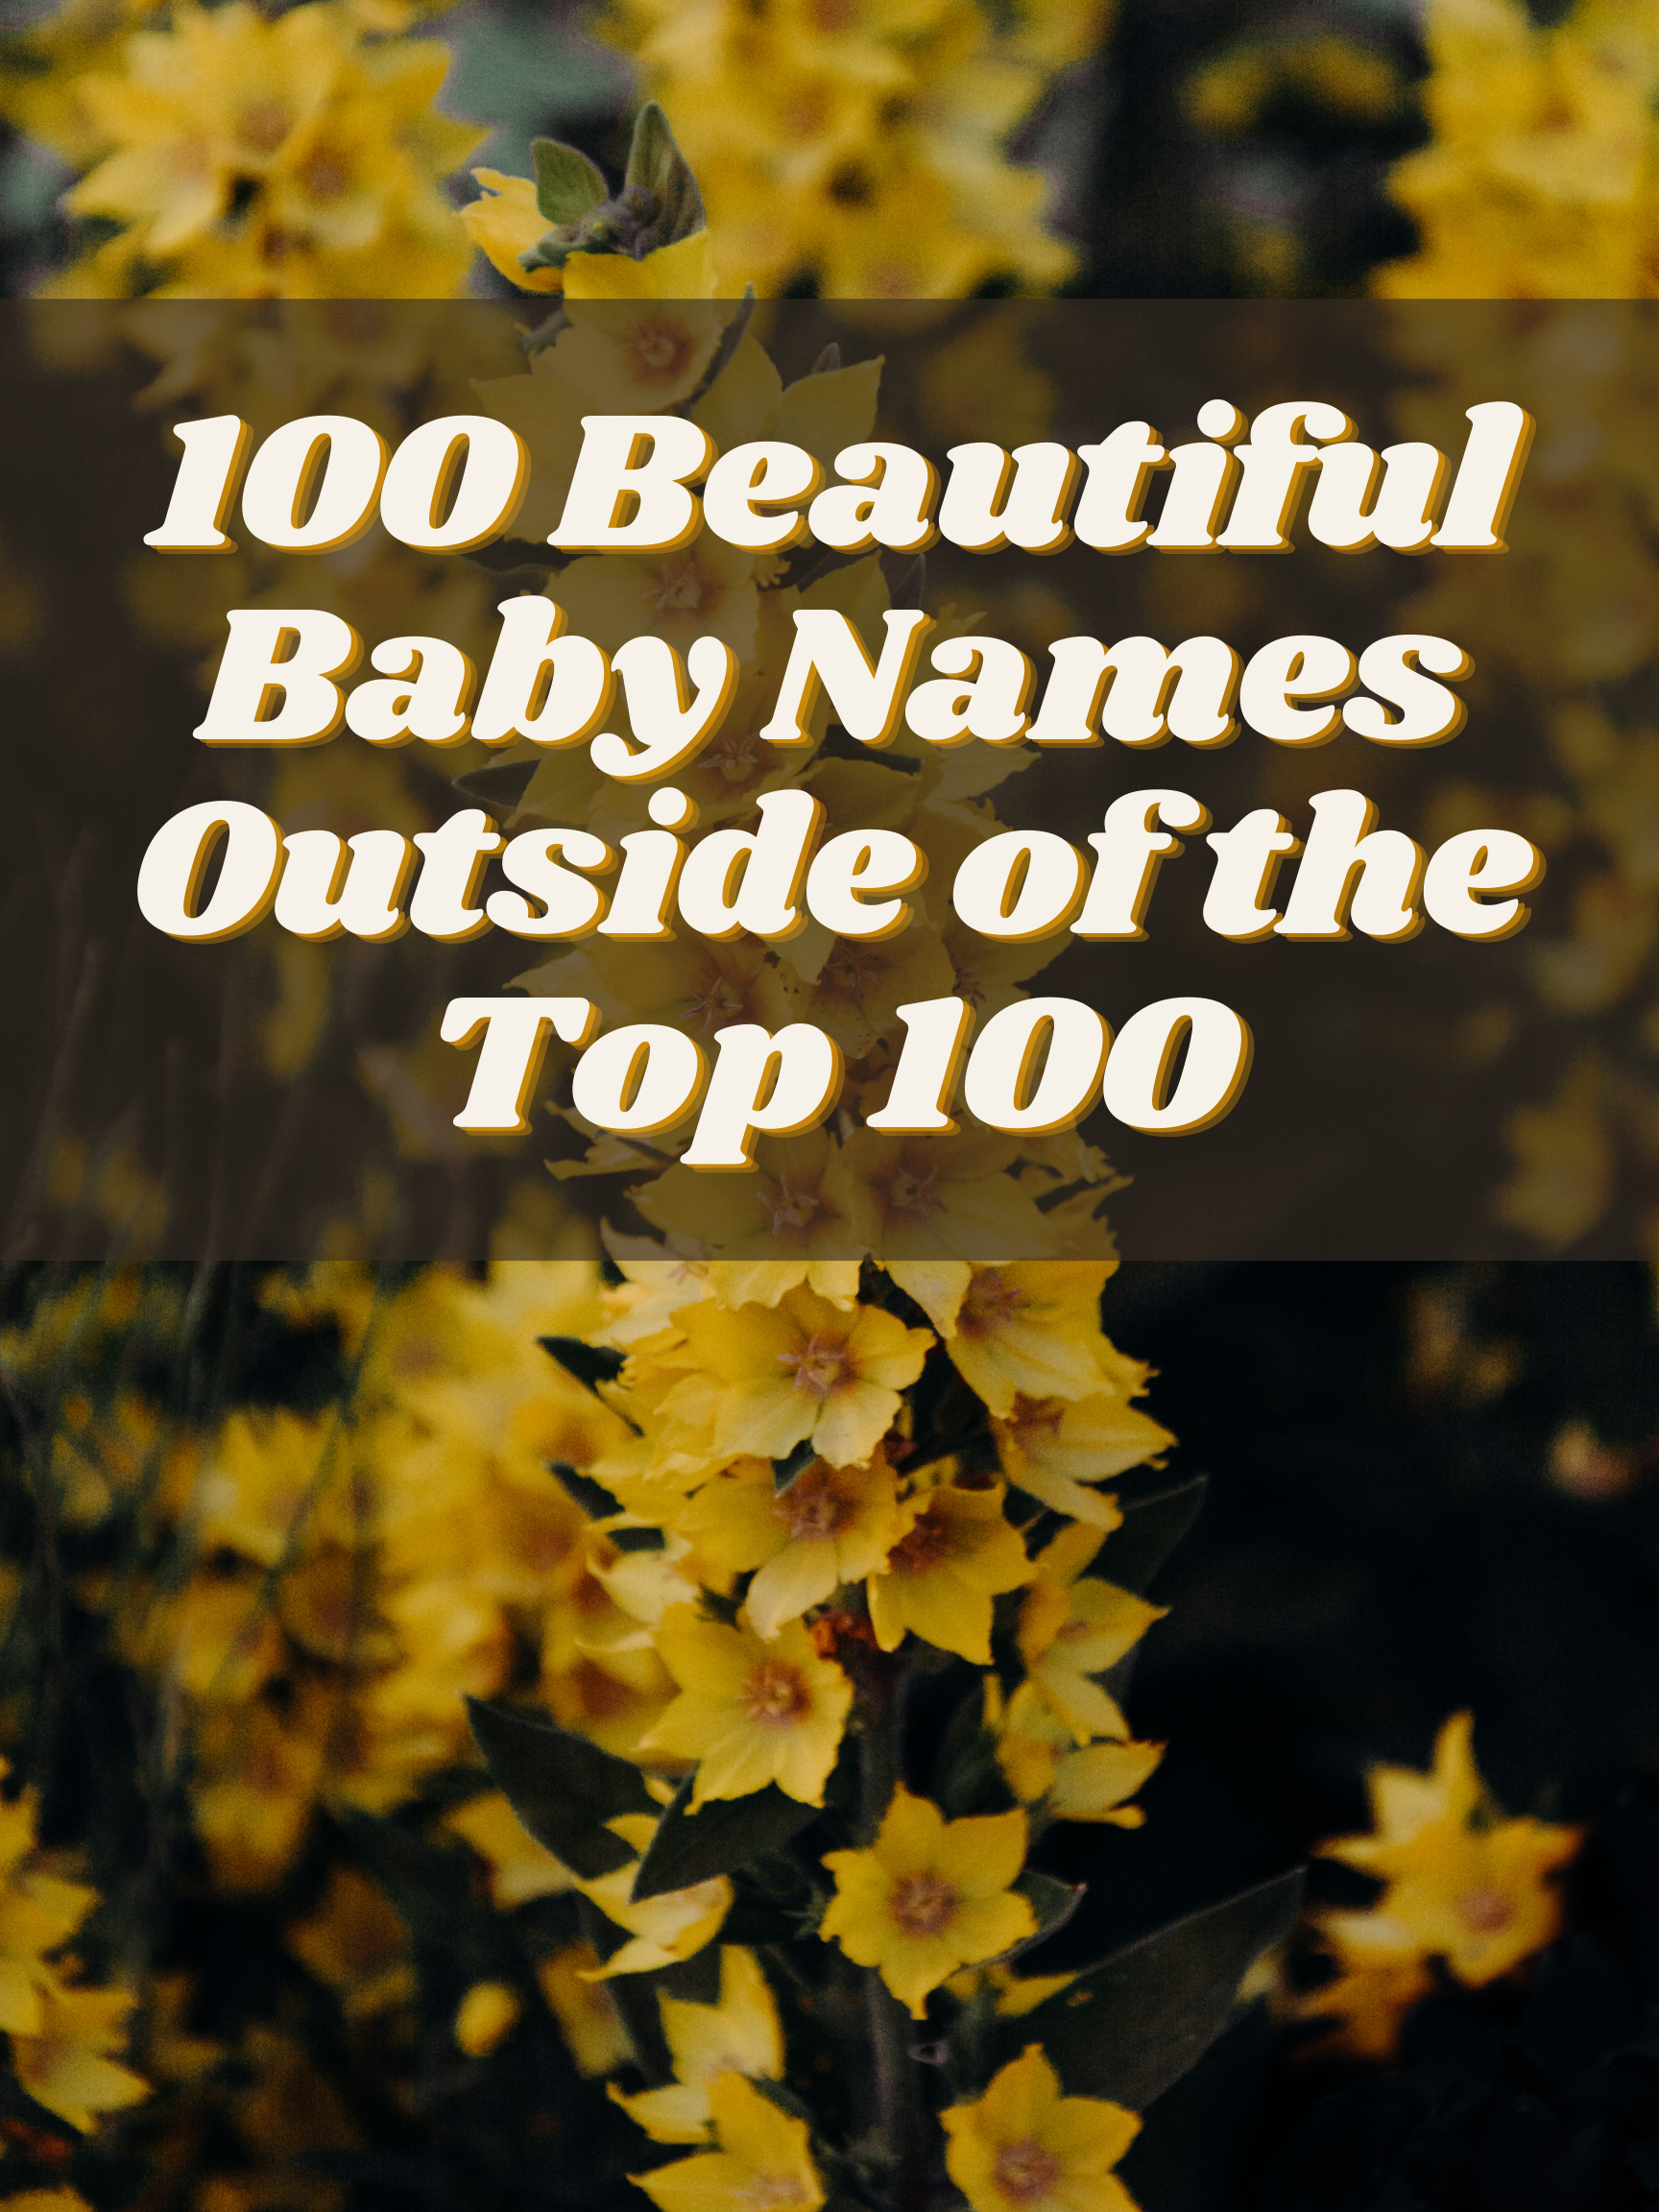 100 Beautiful Baby Names Outside of the Top 100